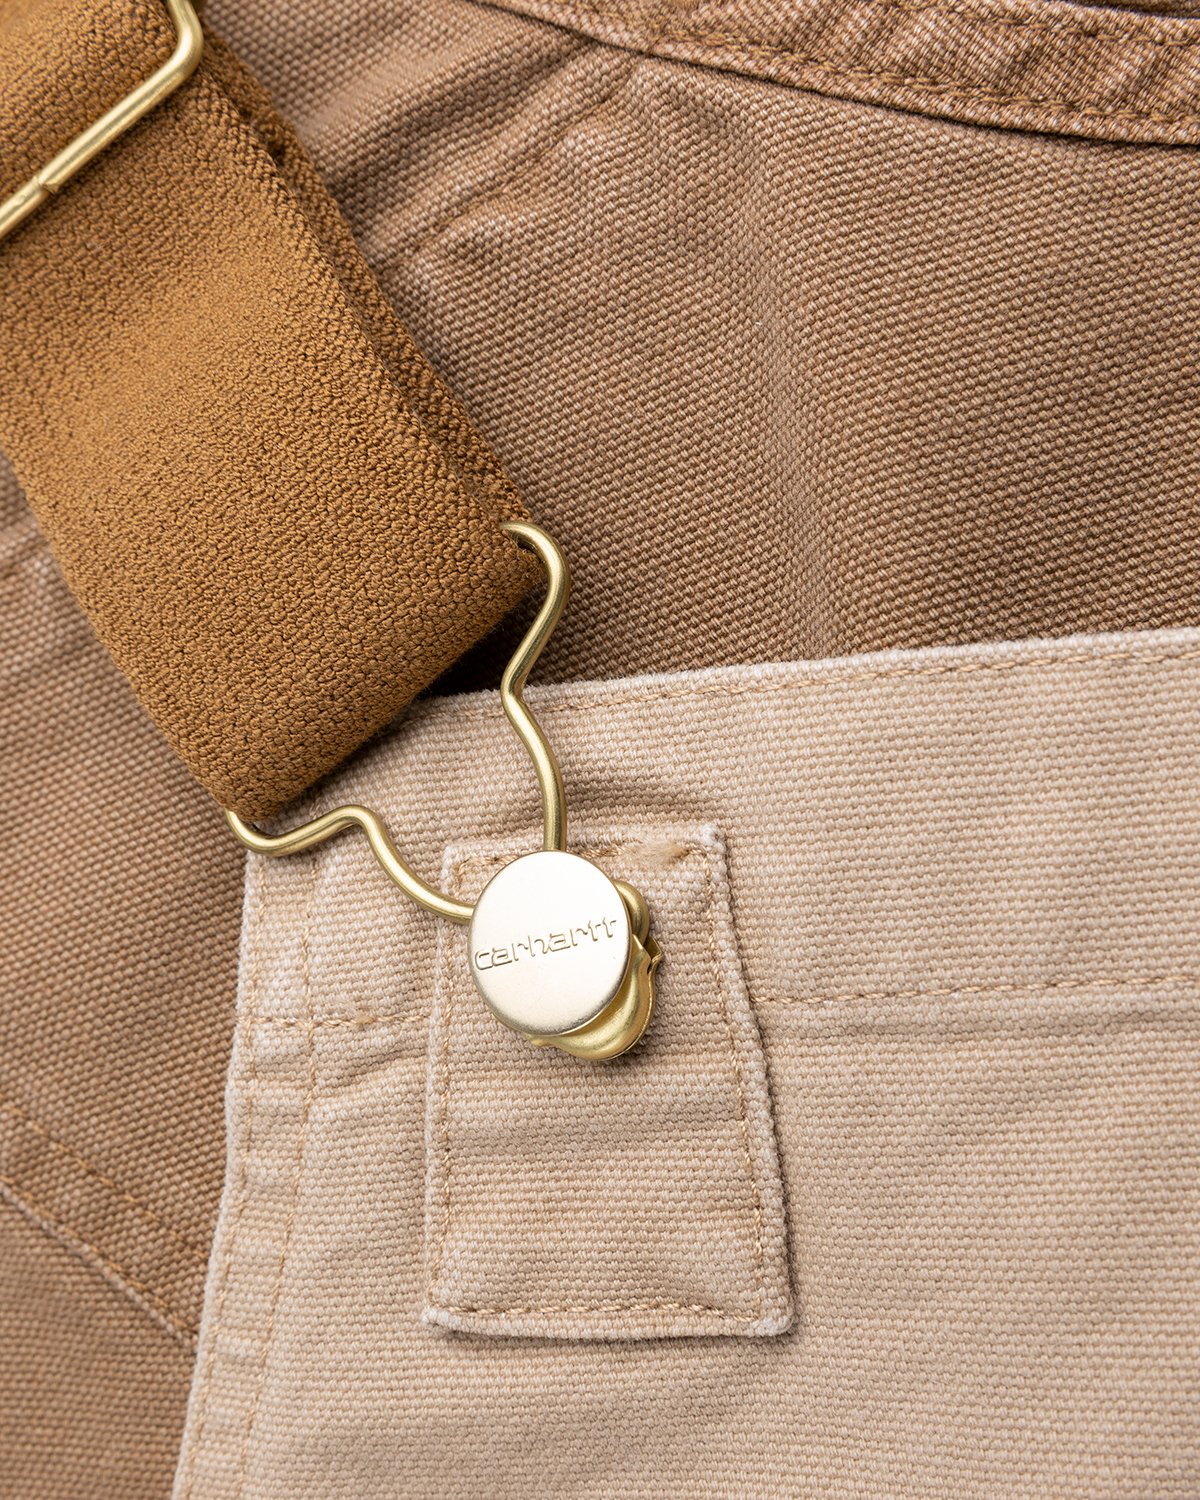 Carhartt WIP - Double Knee Bib Overall Dust Hamilton Brown - Clothing - Brown - Image 5